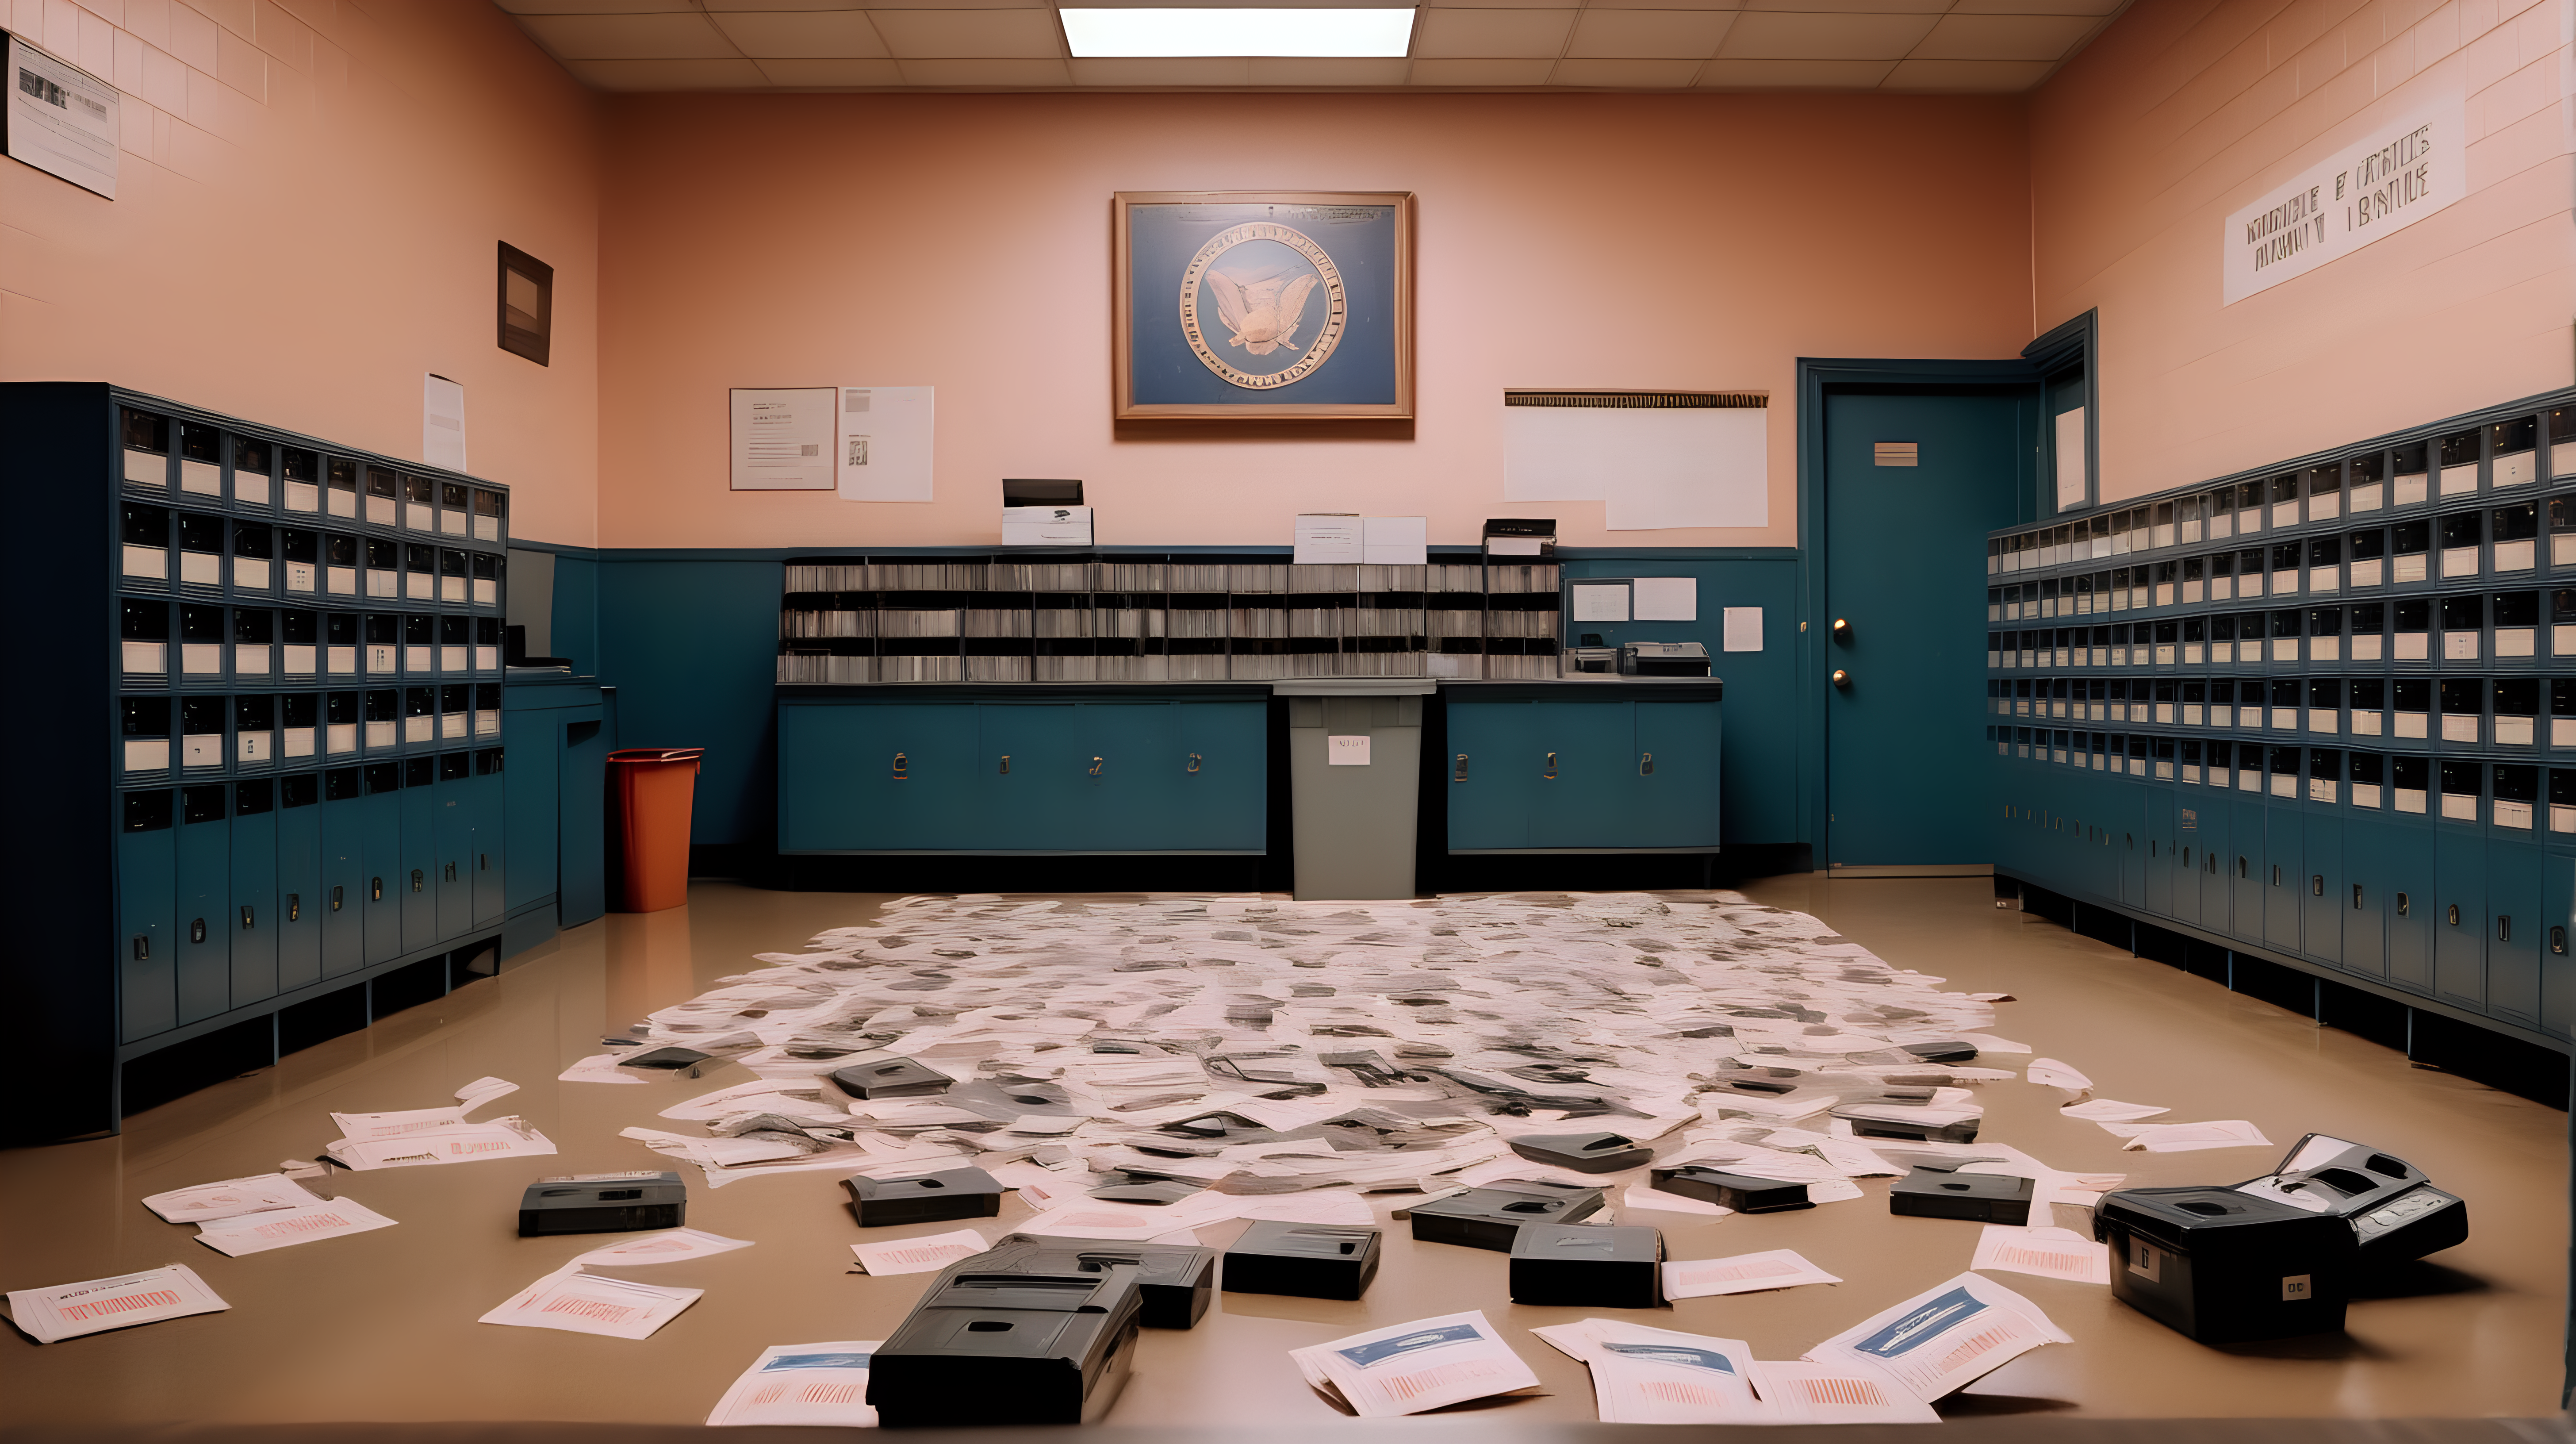 high quality photograph of an old United States Postal Service  post office with a bin of video tapes on the floor in the style of a wes anderson movie
